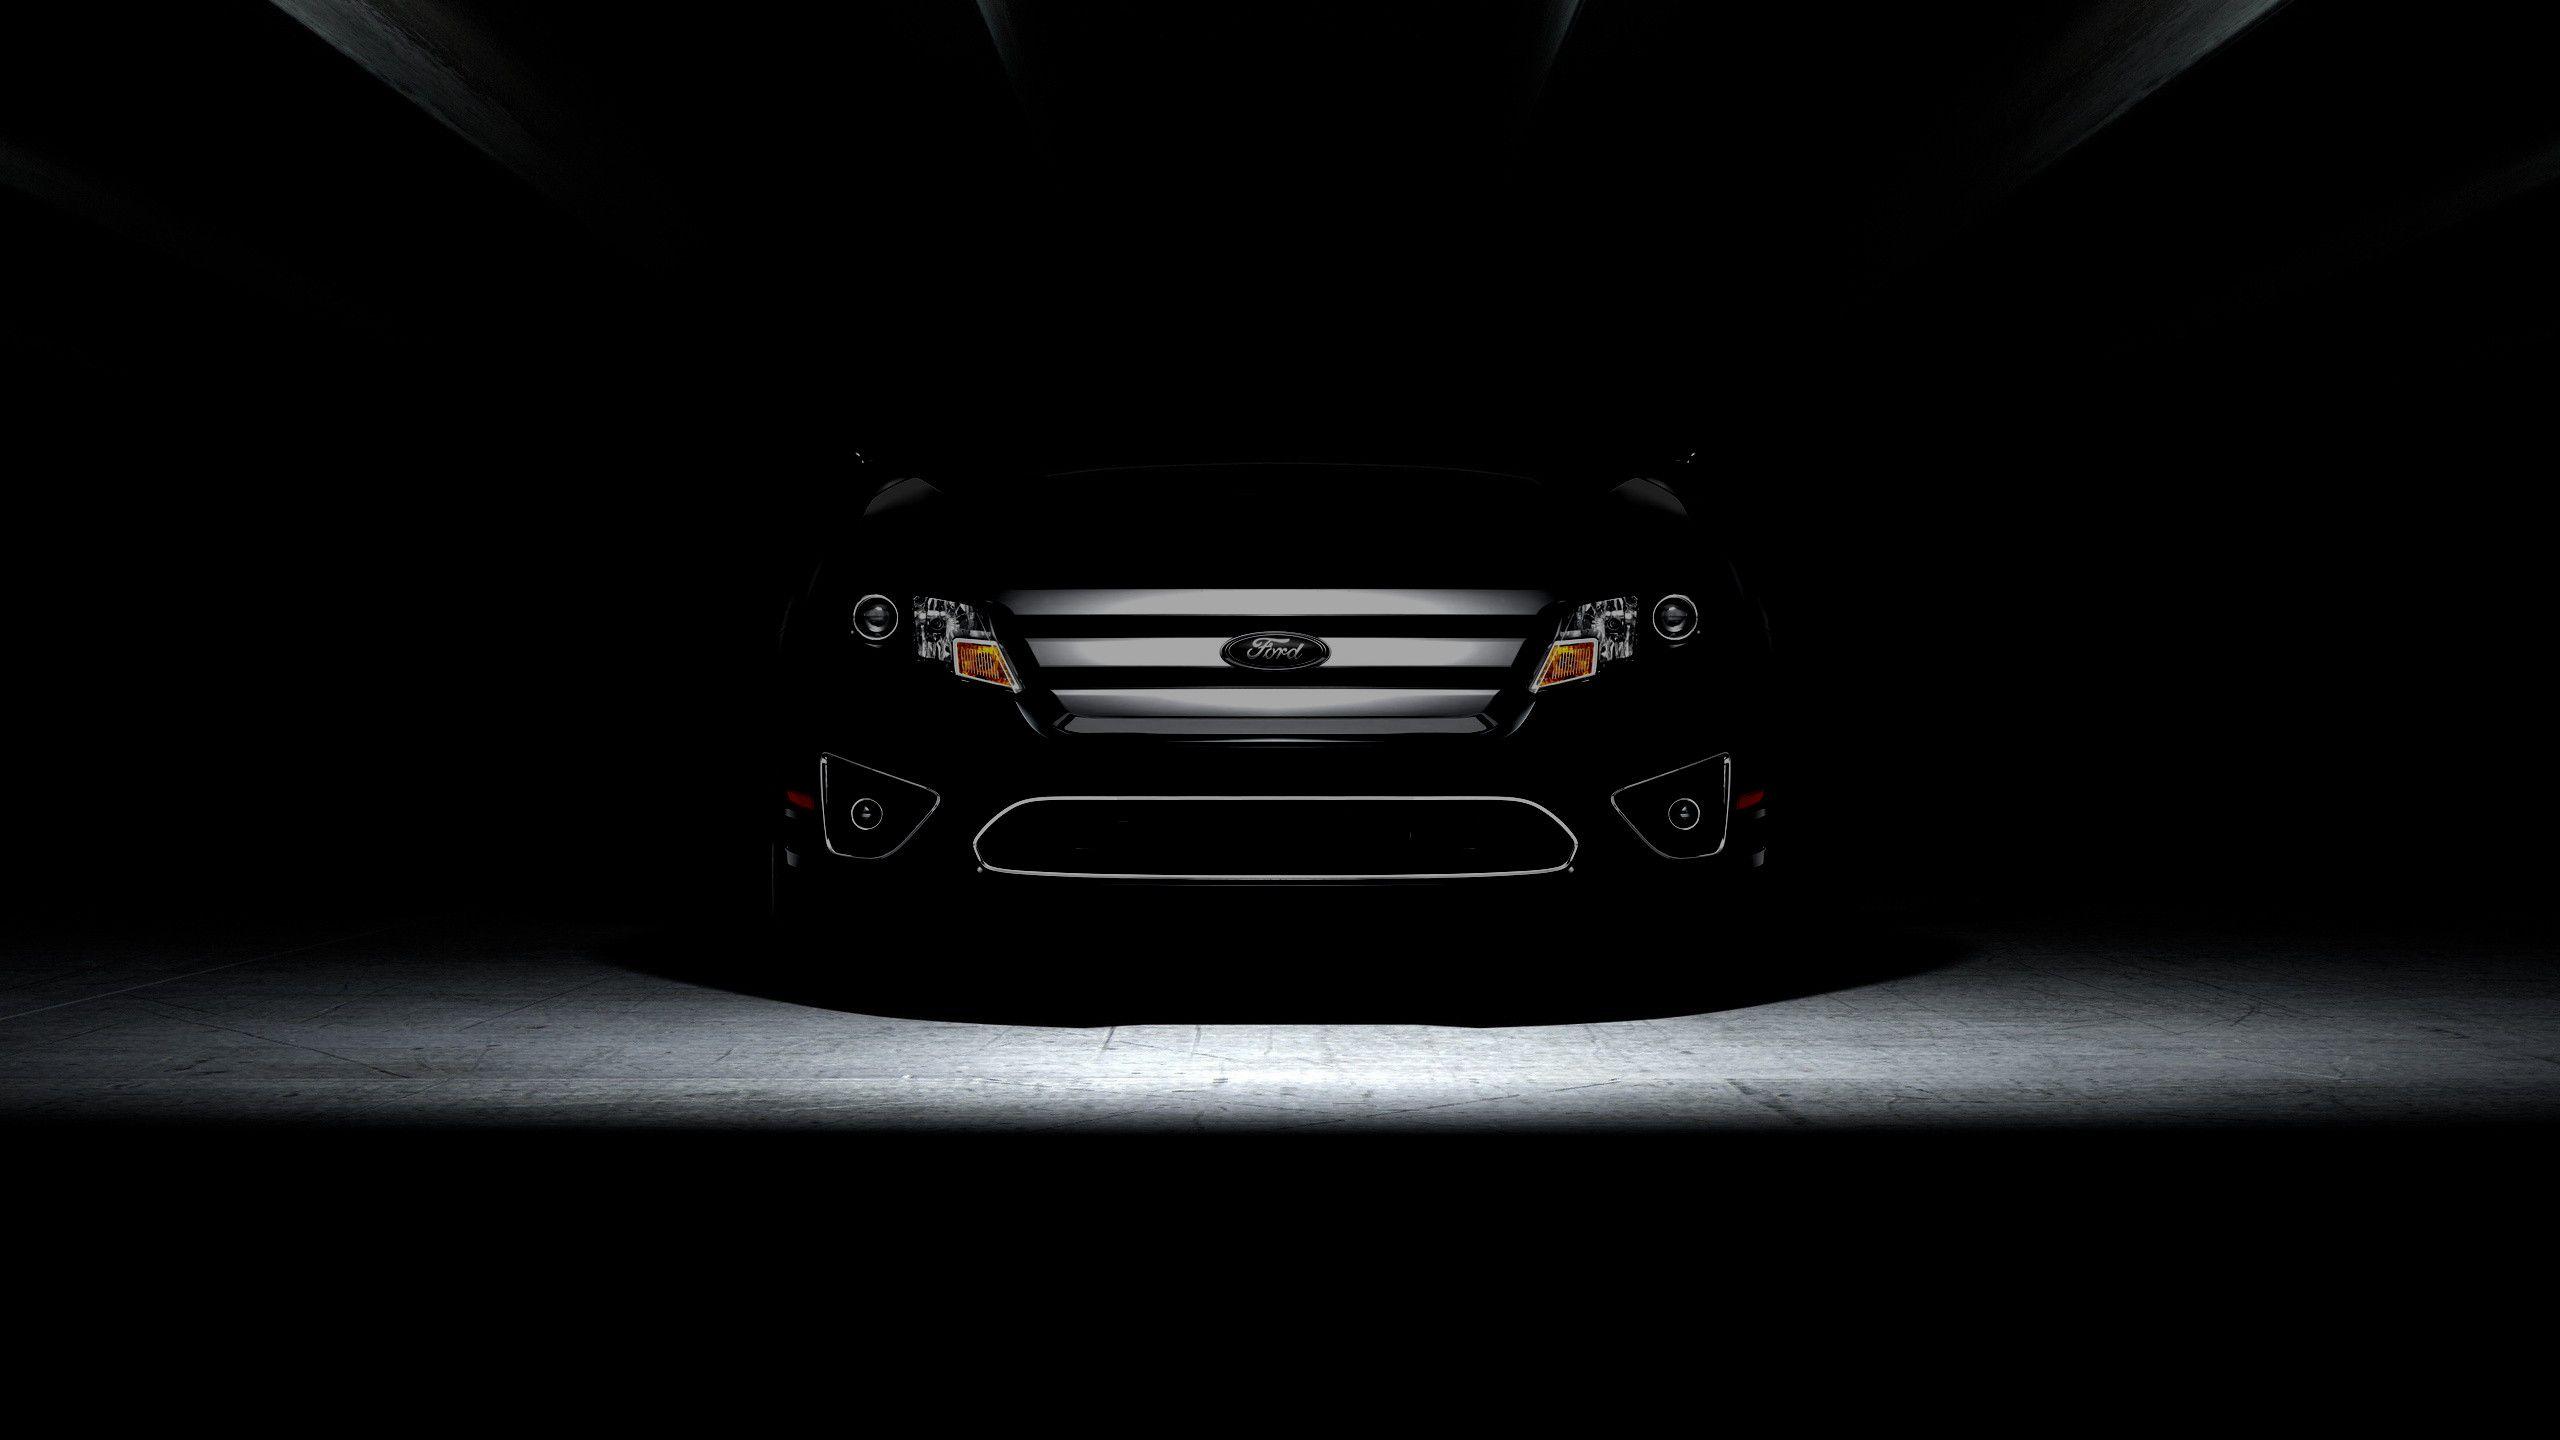 Ford Fusion Wallpapers - Top Free Ford